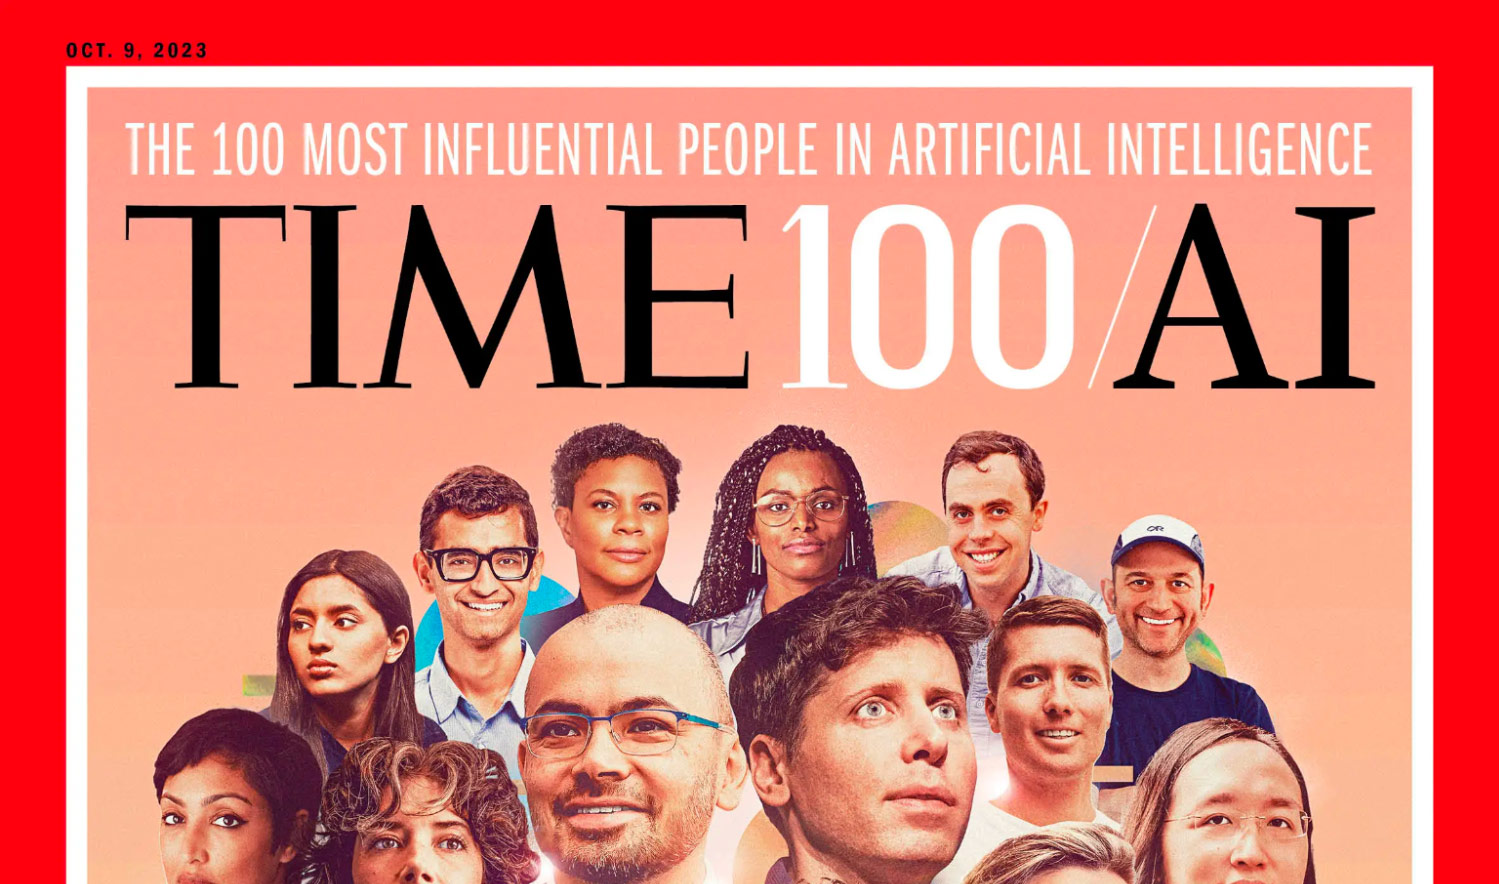 Sneha Revanur, the youngest of TIME100 AI